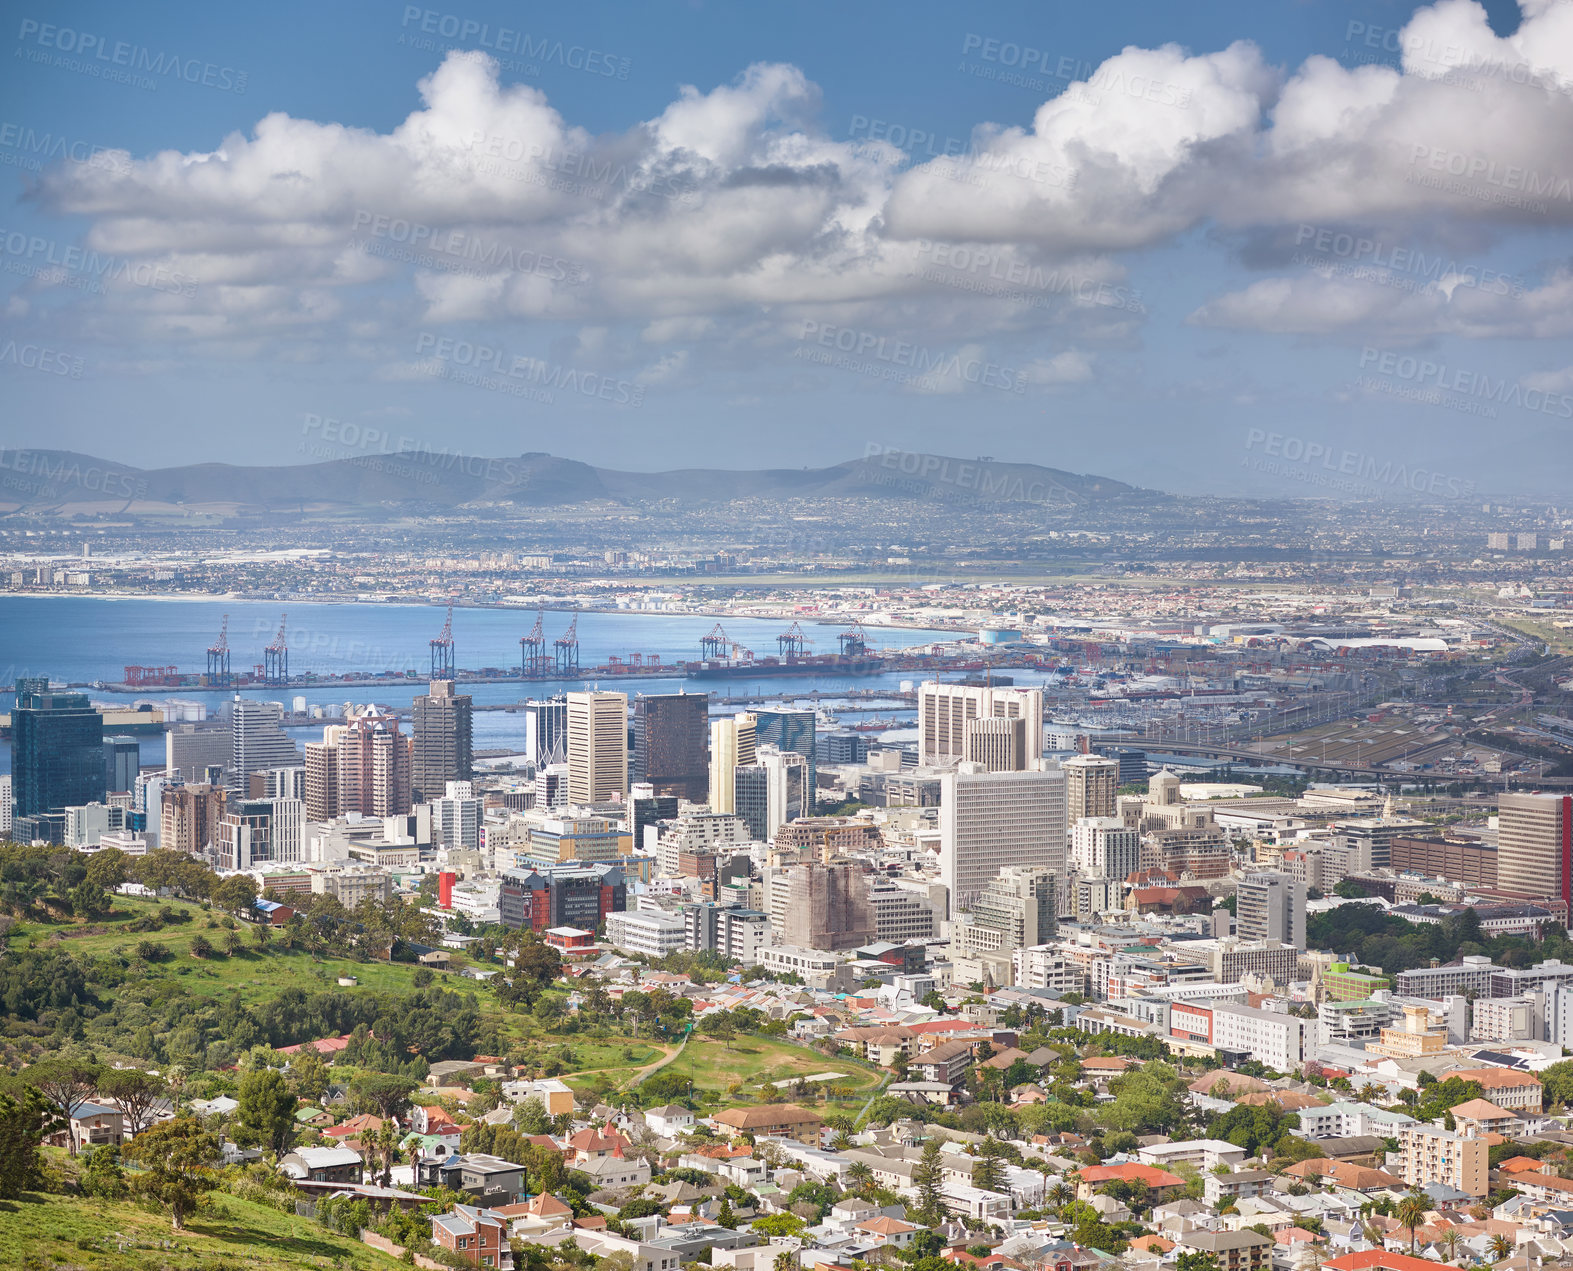 Buy stock photo Landscape of buildings in an urban town with greenery along the mountain and sea. Copy space with views from Signal Hill in Cape Town, South Africa of a cloudy blue sky over a beautiful coastal city